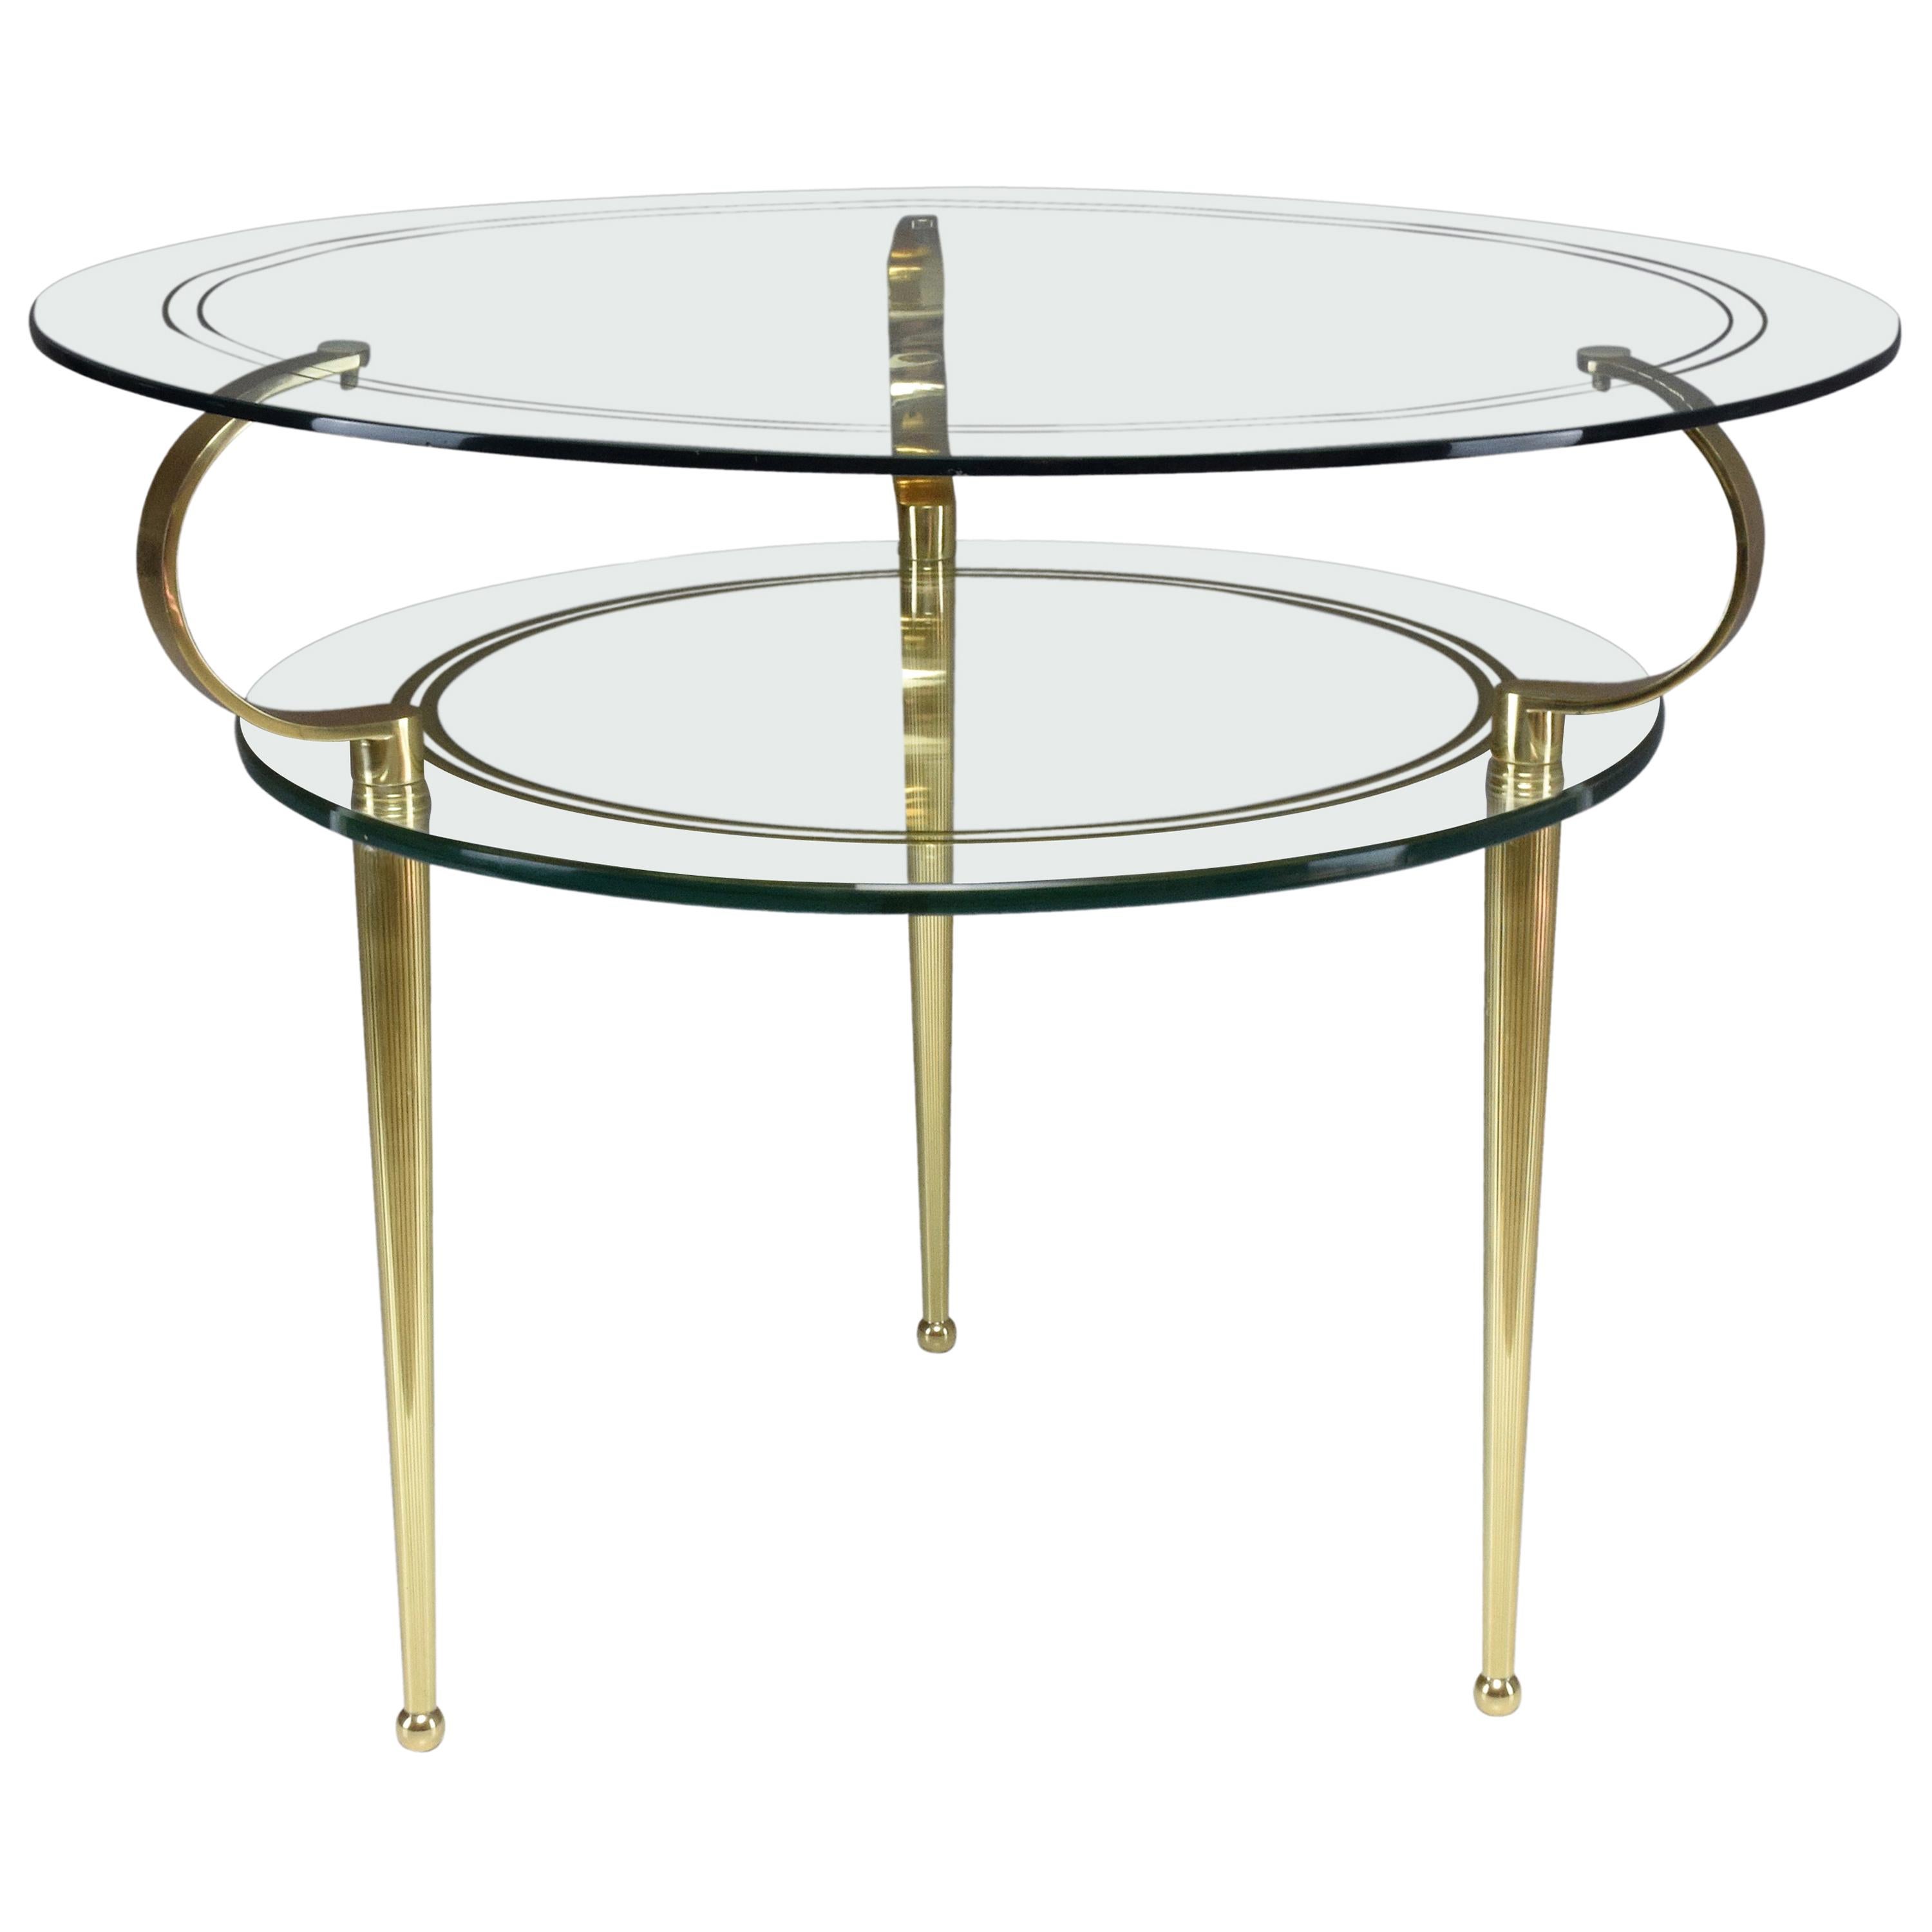 Italian Vintage Round Two-Tier Glass Table by Cesare Lacca, 1950s